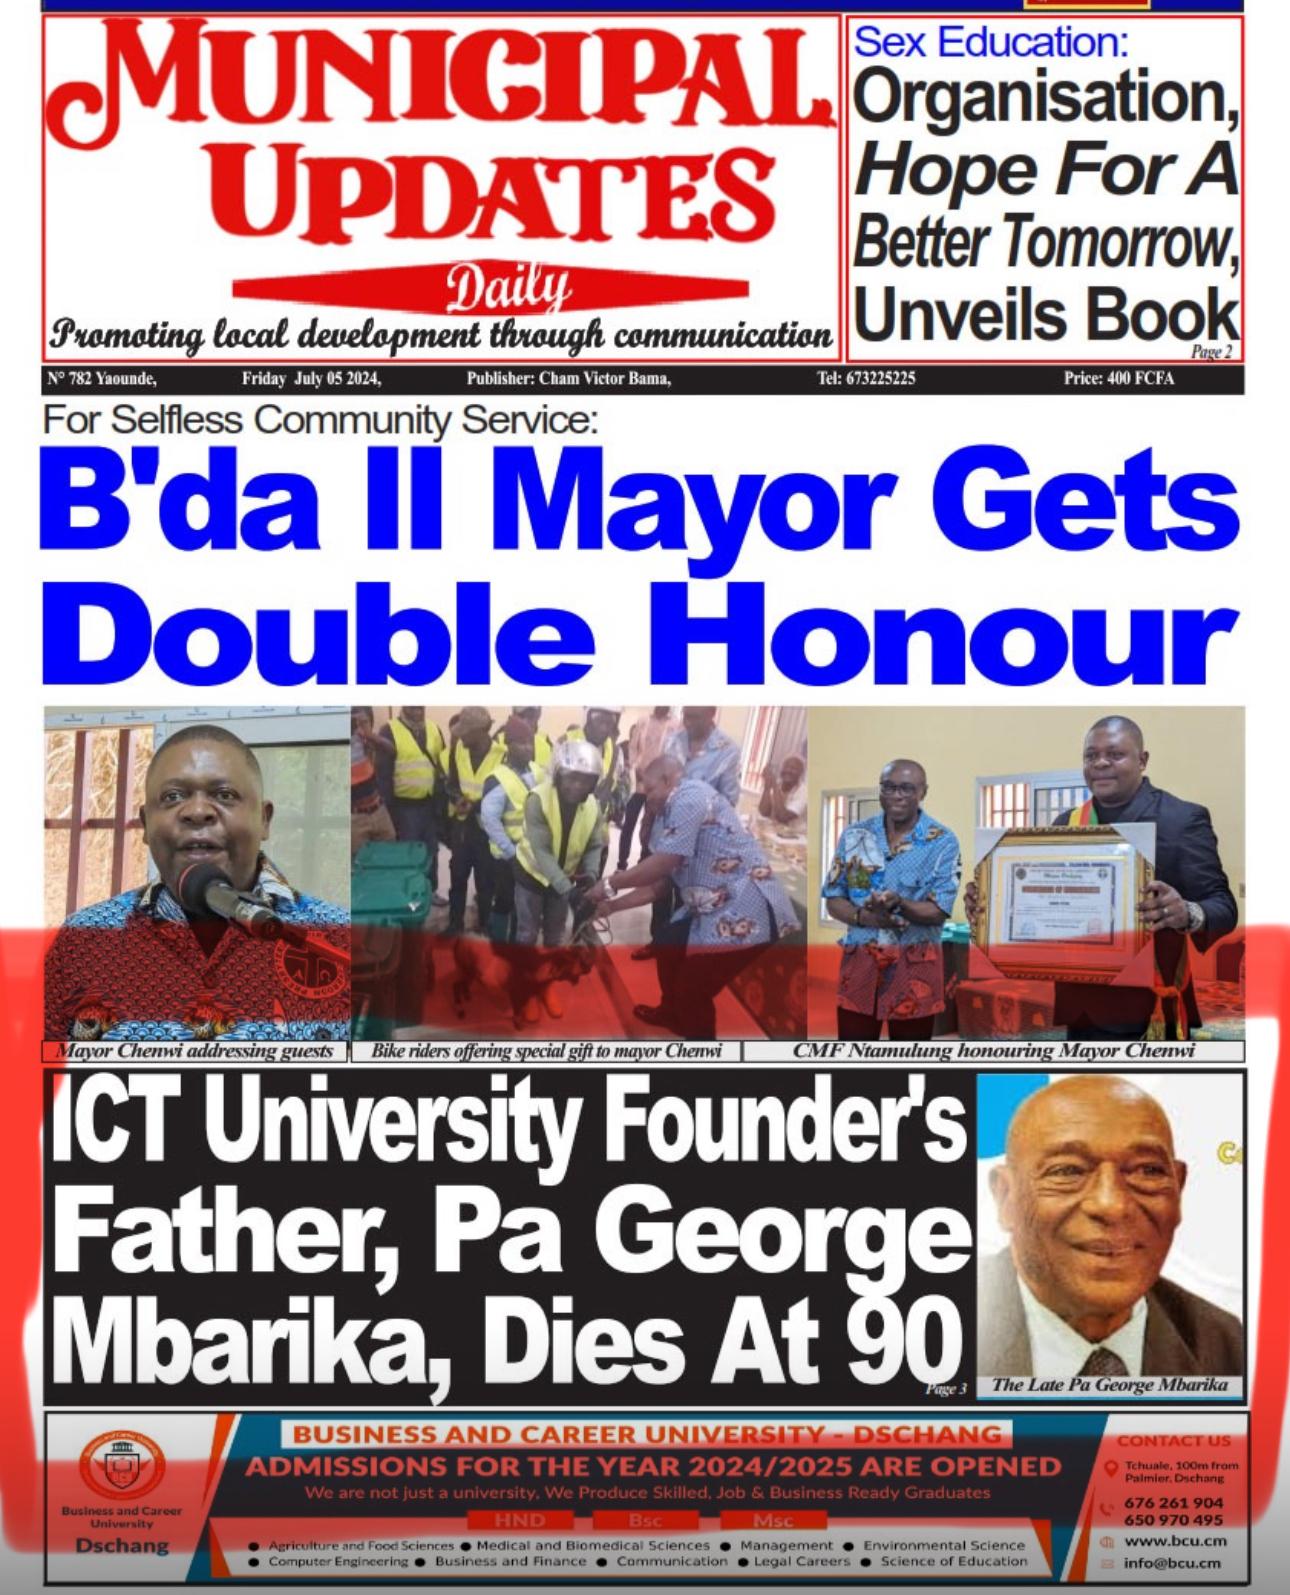 ICT University Founder’s Father, Pa George Mbarika, Dies At 90